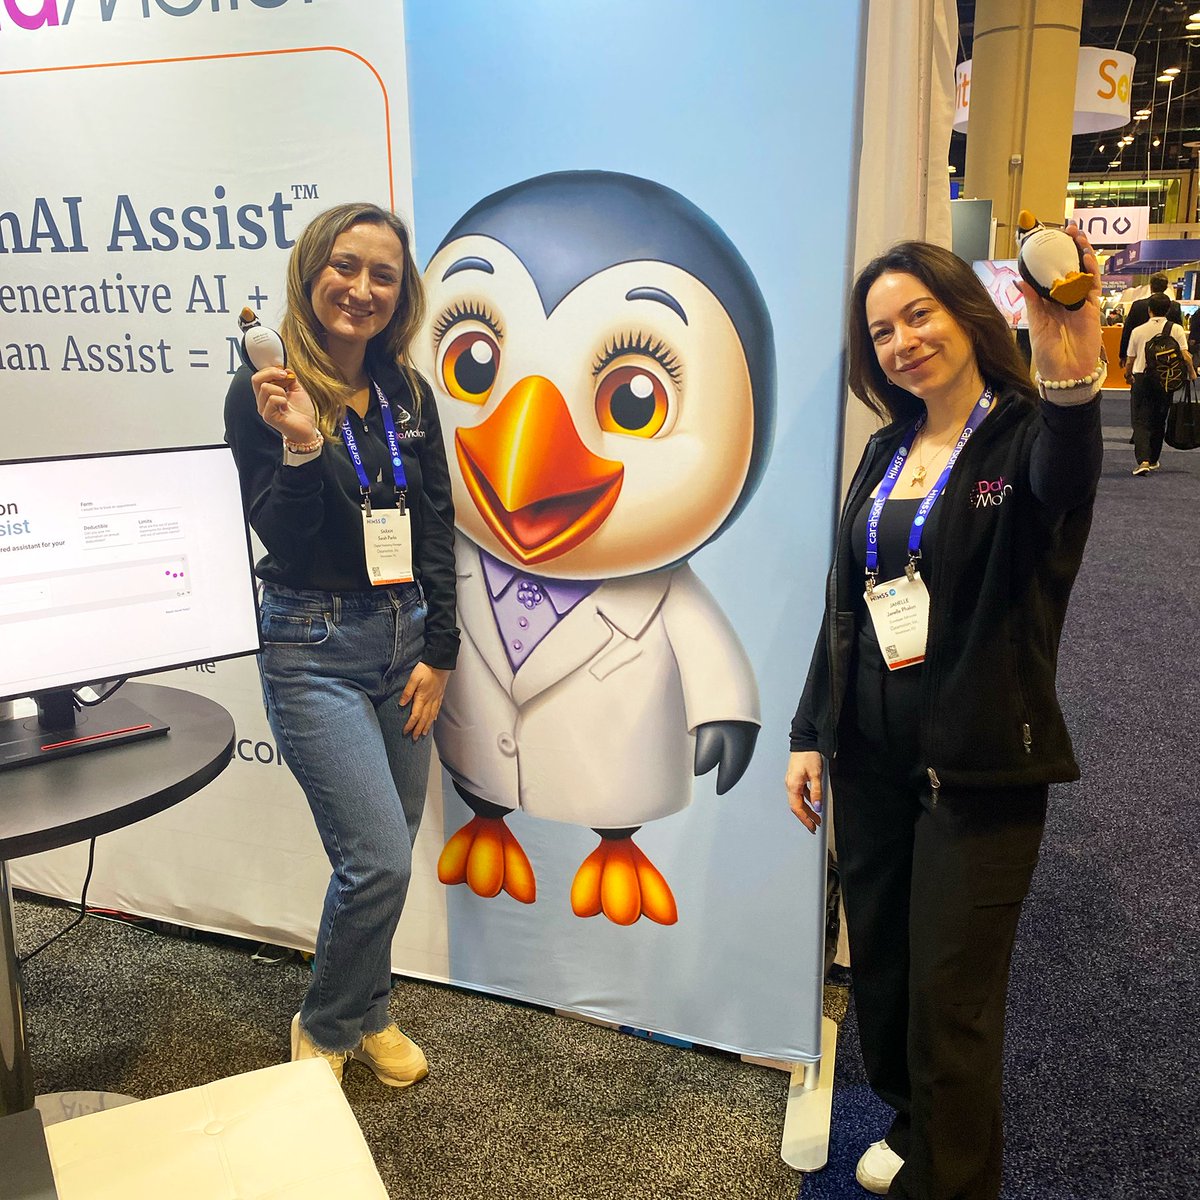 We’re excited for another day of engaging discussions at #HIMSS24. Stop by Booth # 4469 to chat about how #GenAI & our secure digital engagement solutions & human assist can help your organization & learn how to enter to win a $100 gift card.

#HealthIT #DigitalCare #Innovation